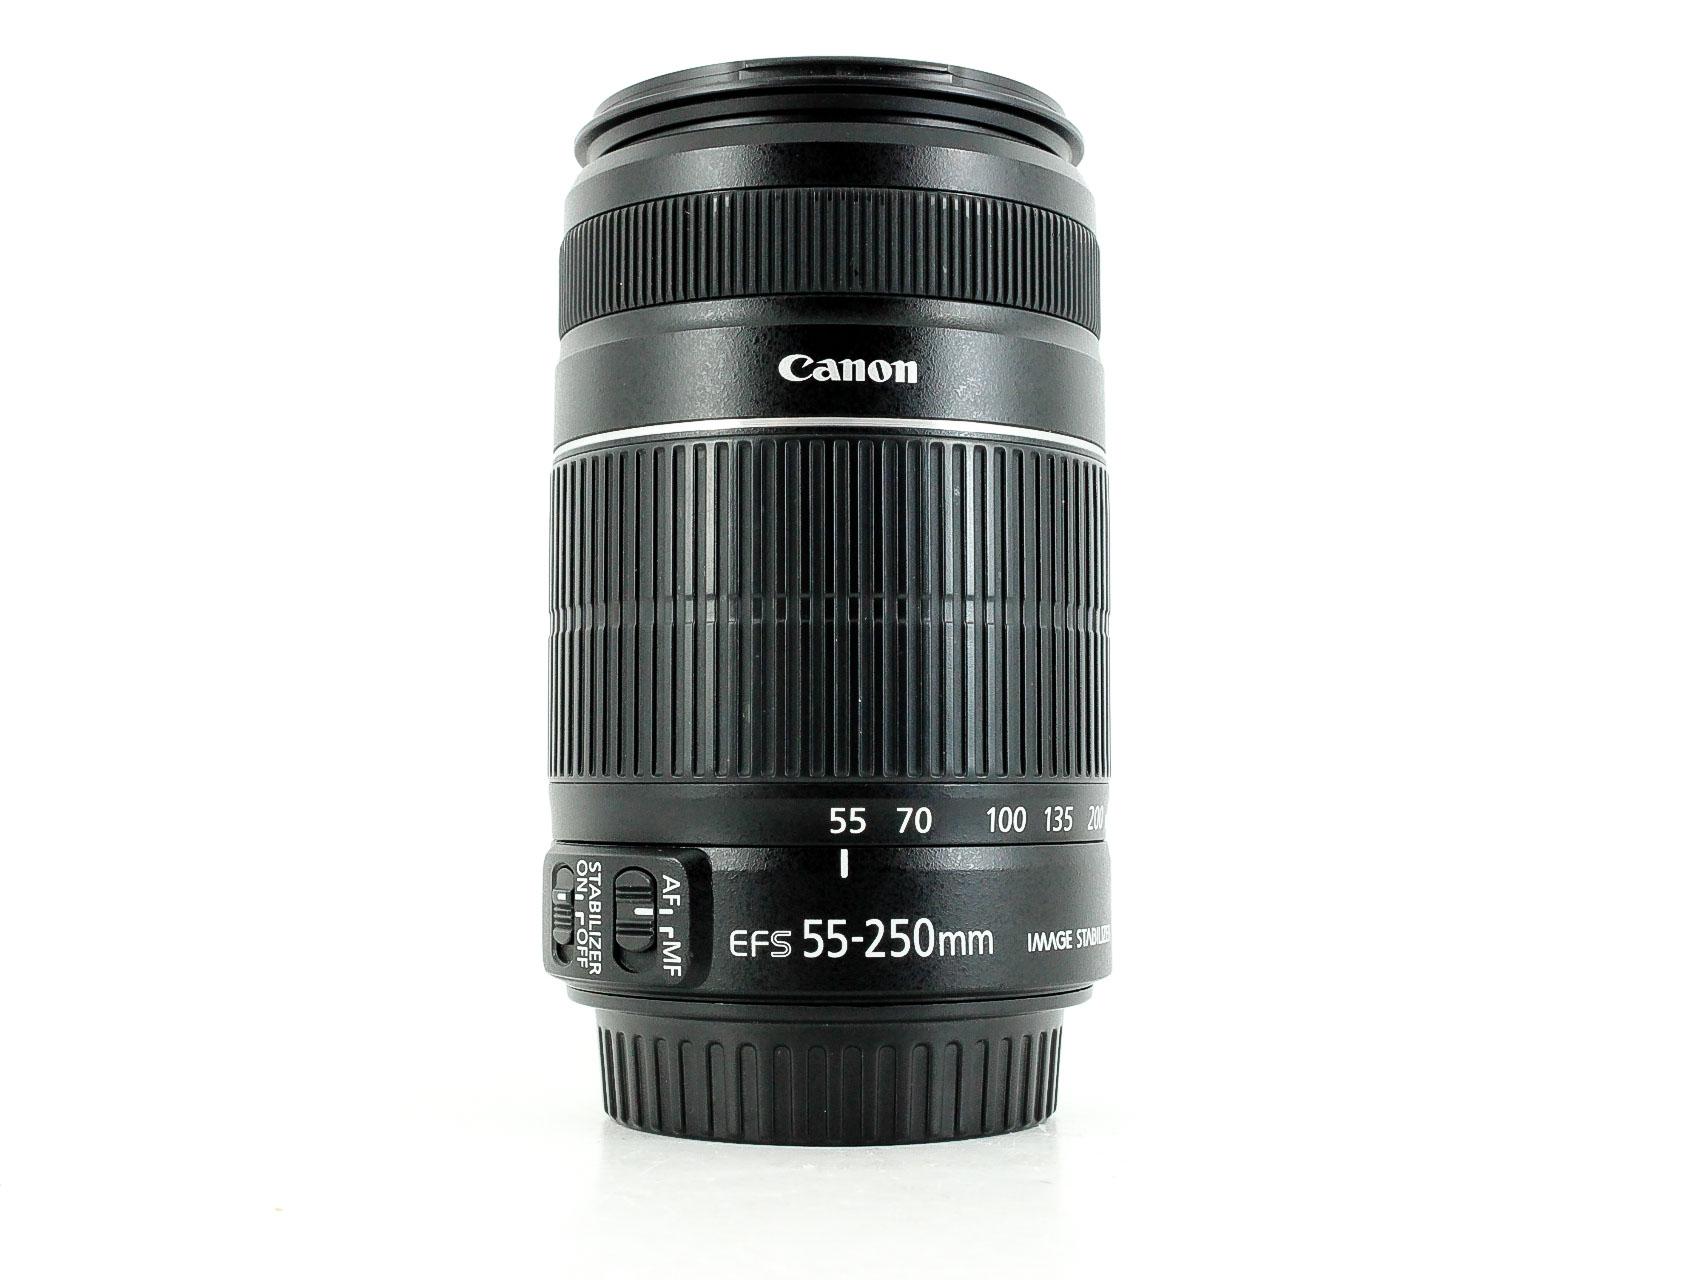 Canon EF-S 55-250mm f/4-5.6 IS II Lens Lenses and Cameras